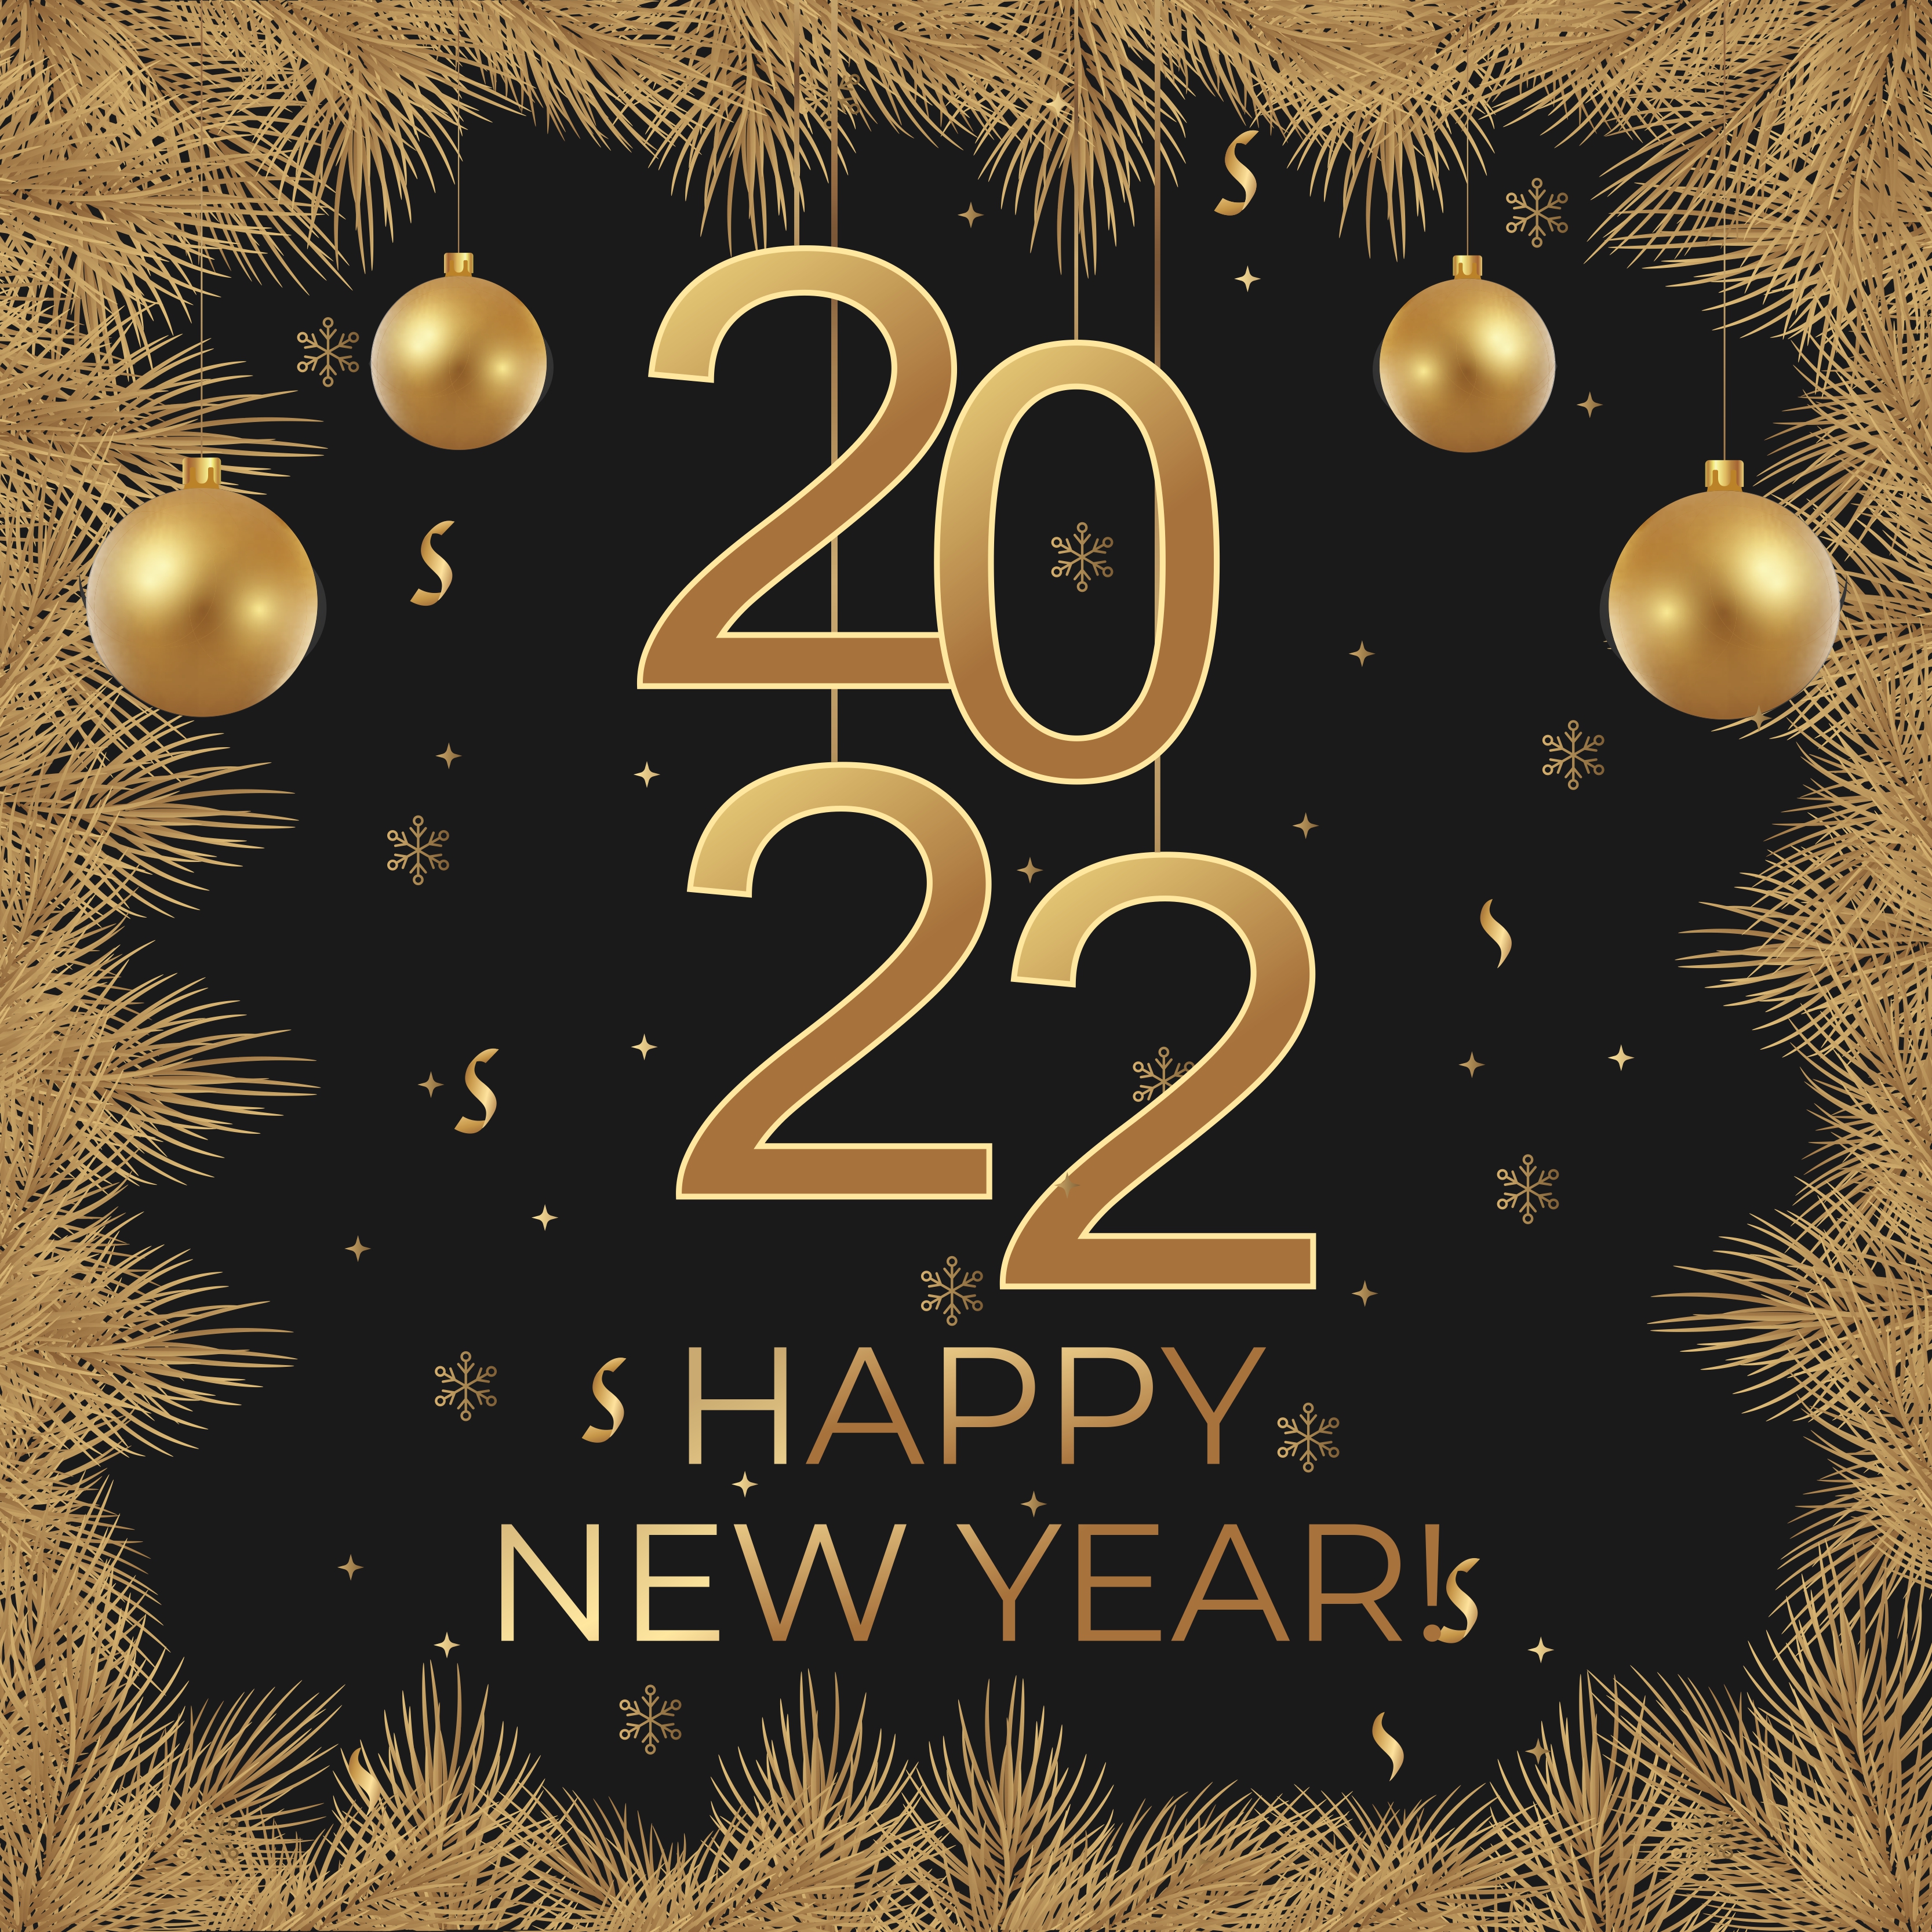 Happy 2022 new year banner background template